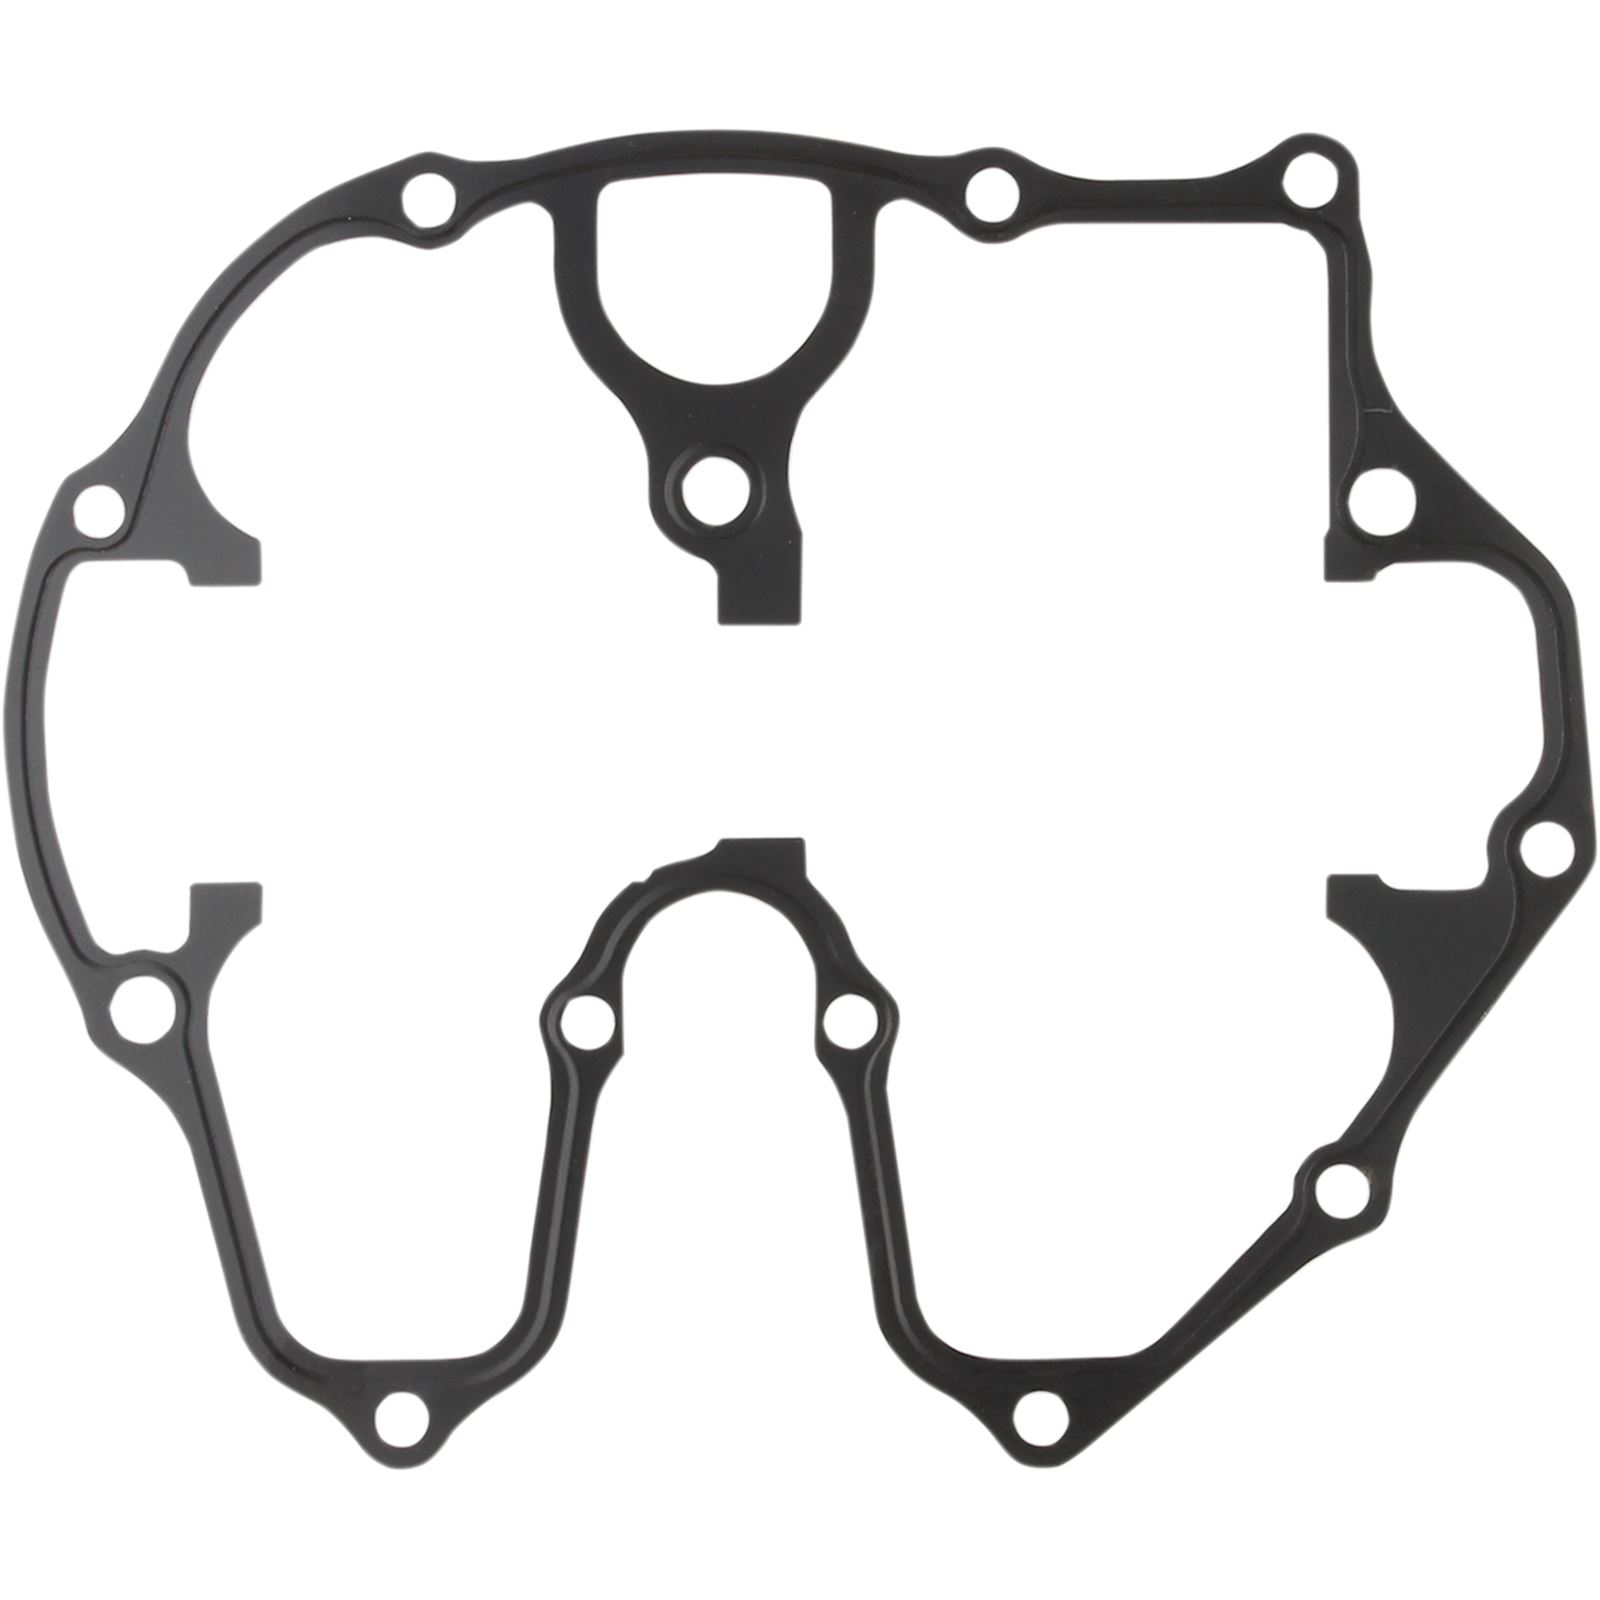 Cometic Valve Cover Gasket for Honda